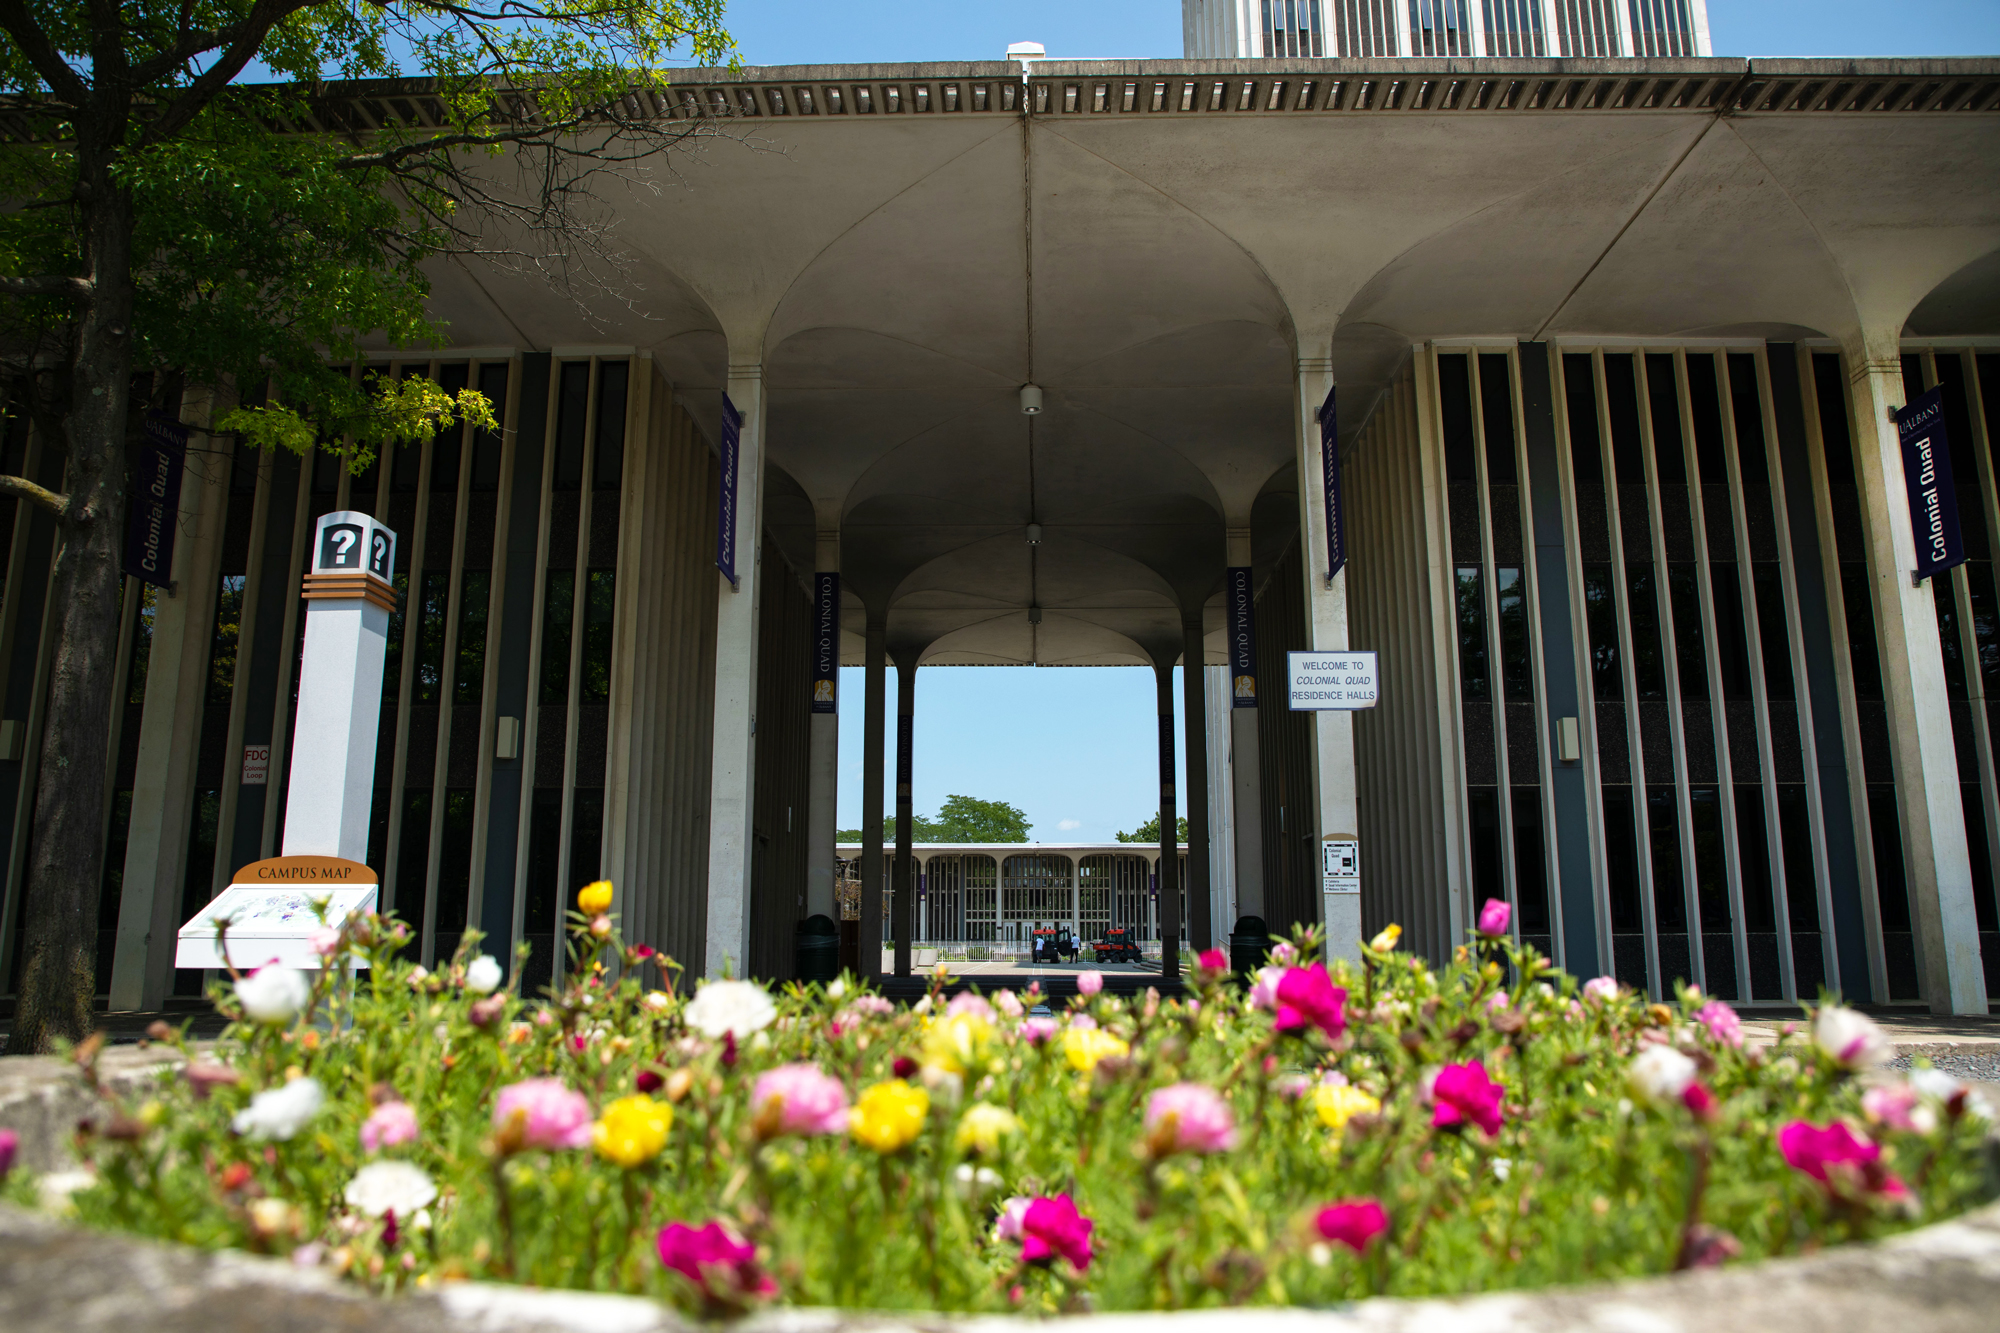 Colonial Quad entry arch with flowers in the foreground